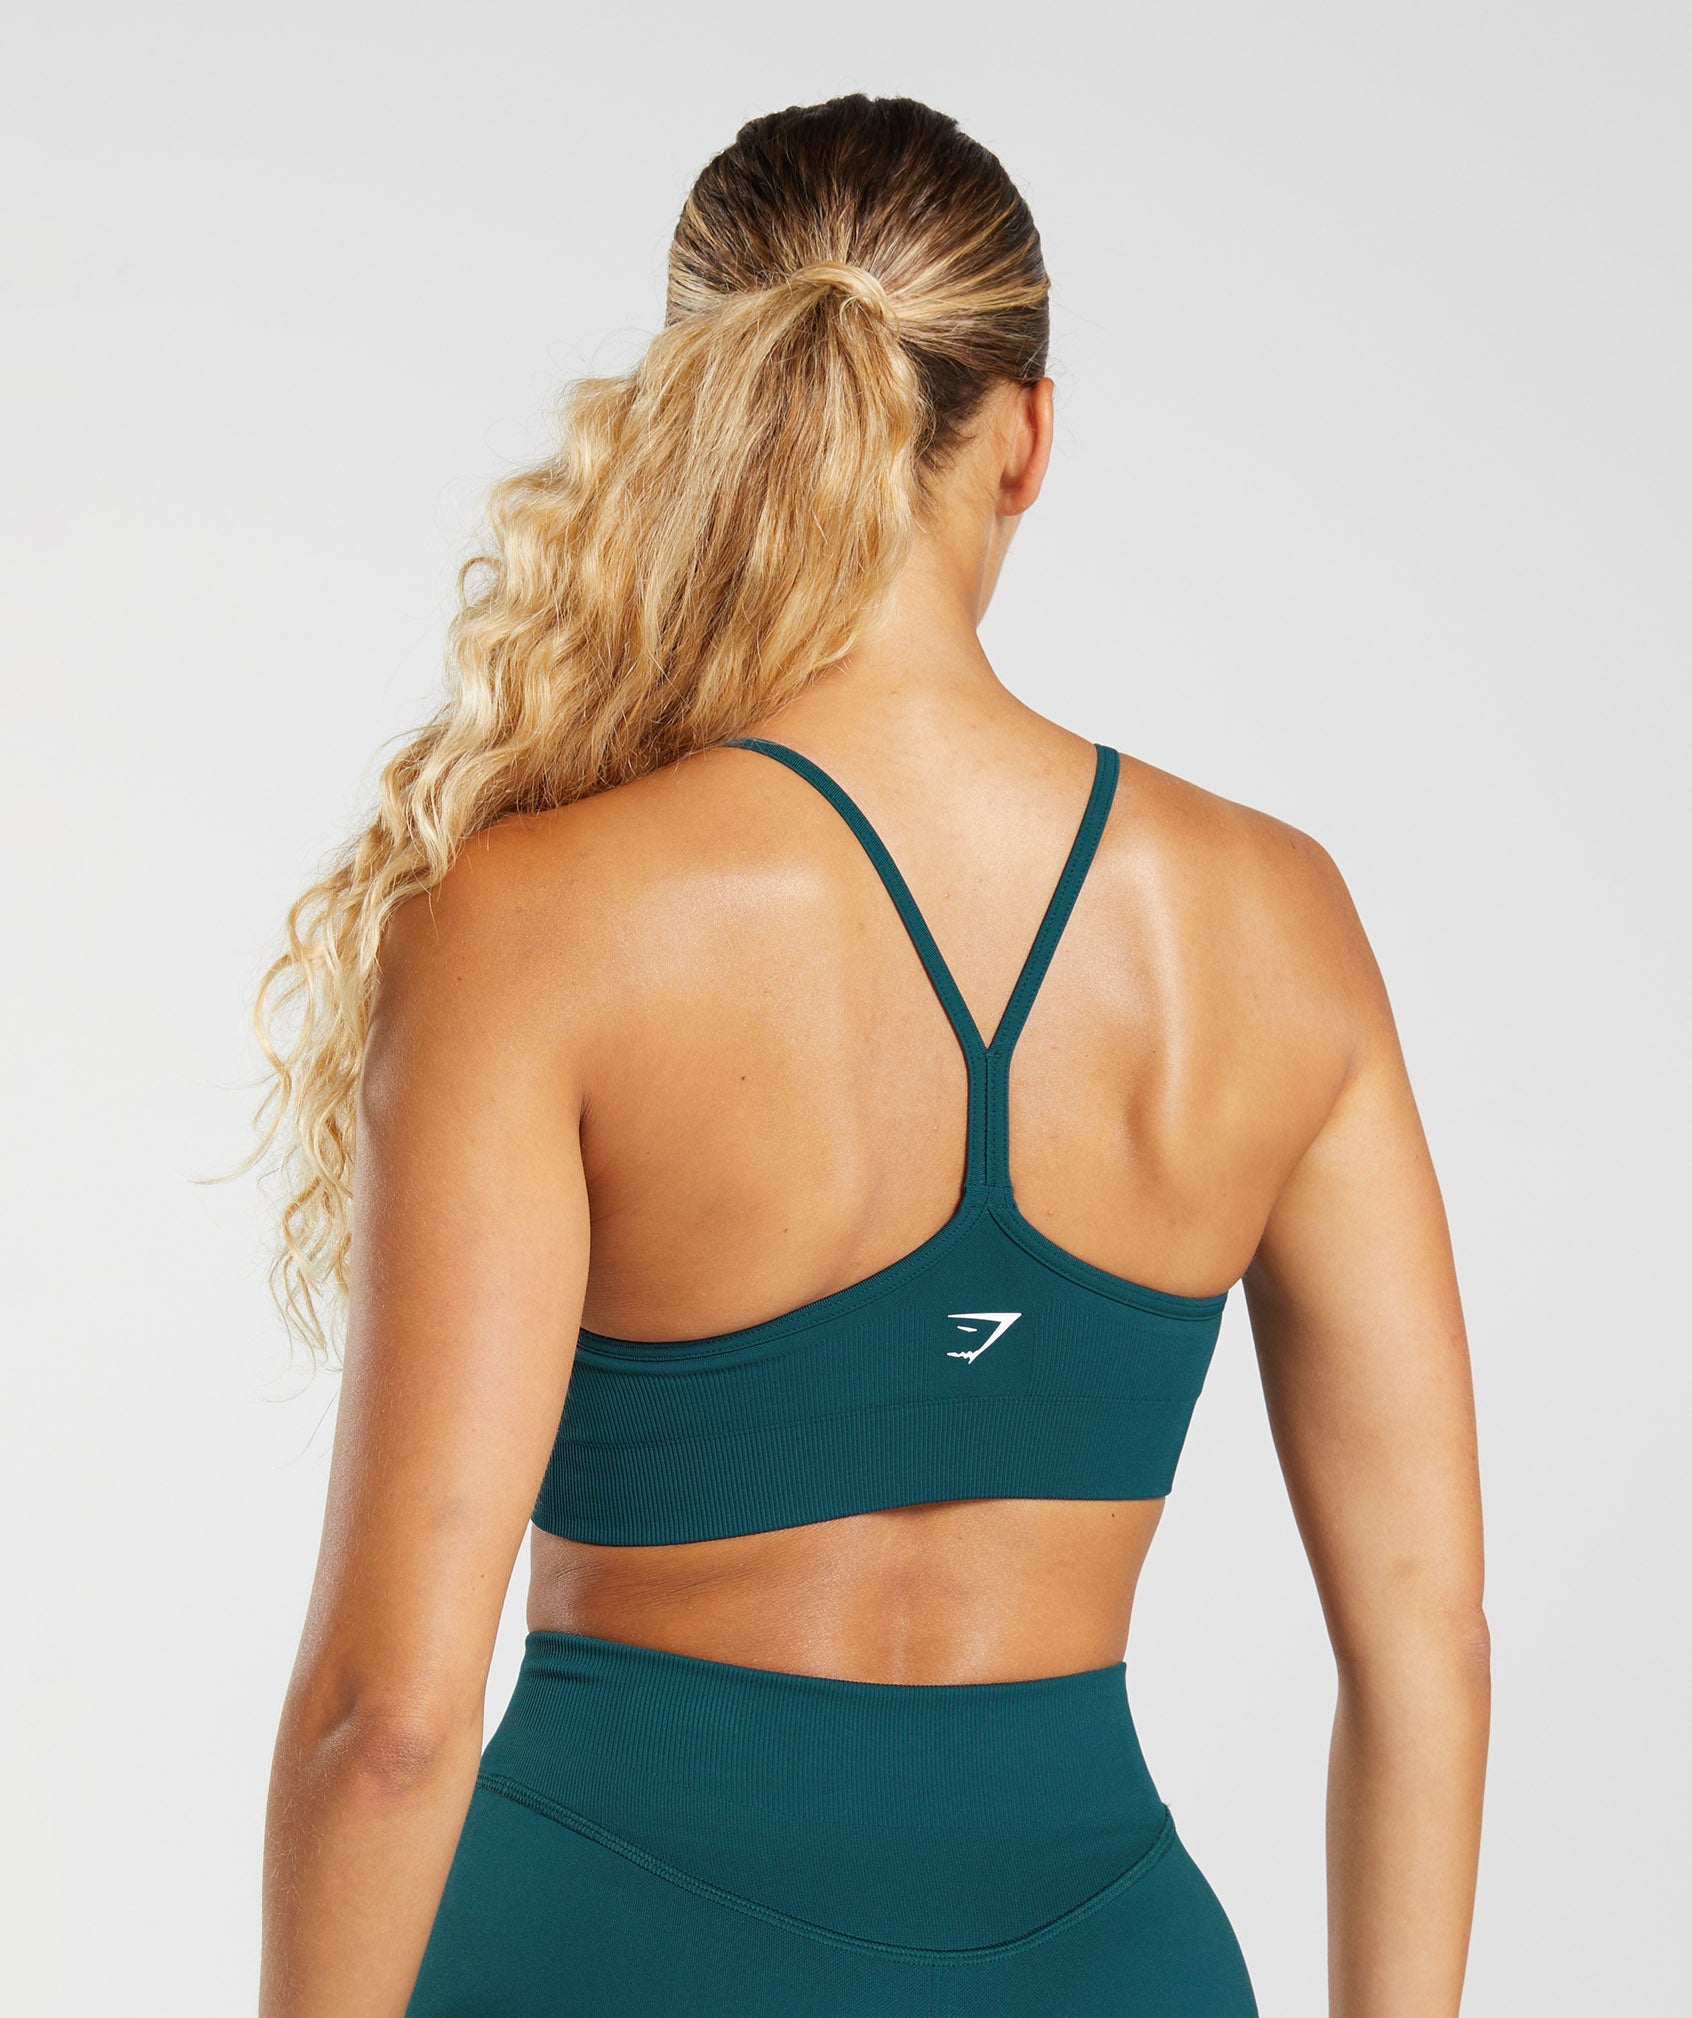 Gymshark Women's Medium Support Ruched Sports Bra LL7 Winter Teal Small NWT